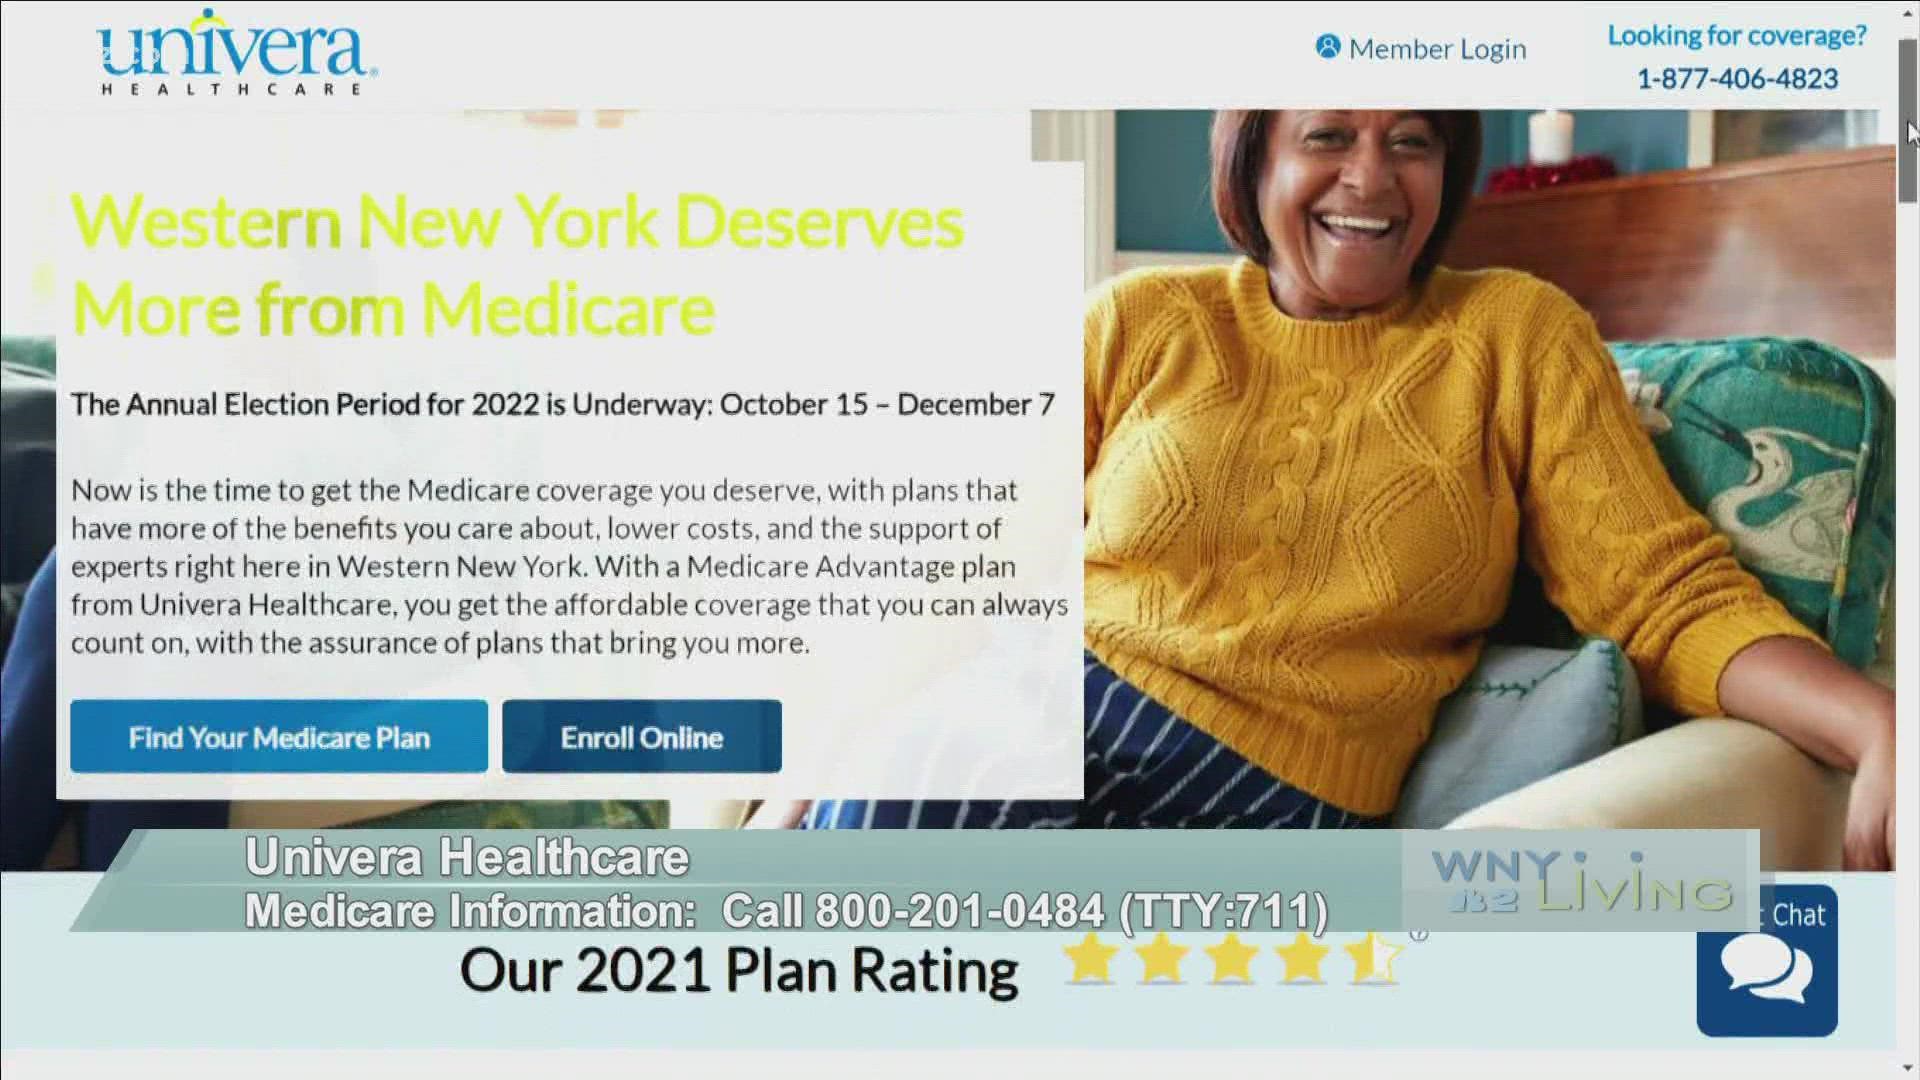 WNY Living - October 16 - Univera Healthcare (THIS VIDEO IS SPONSORED BY UNIVERA HEALTHCARE)